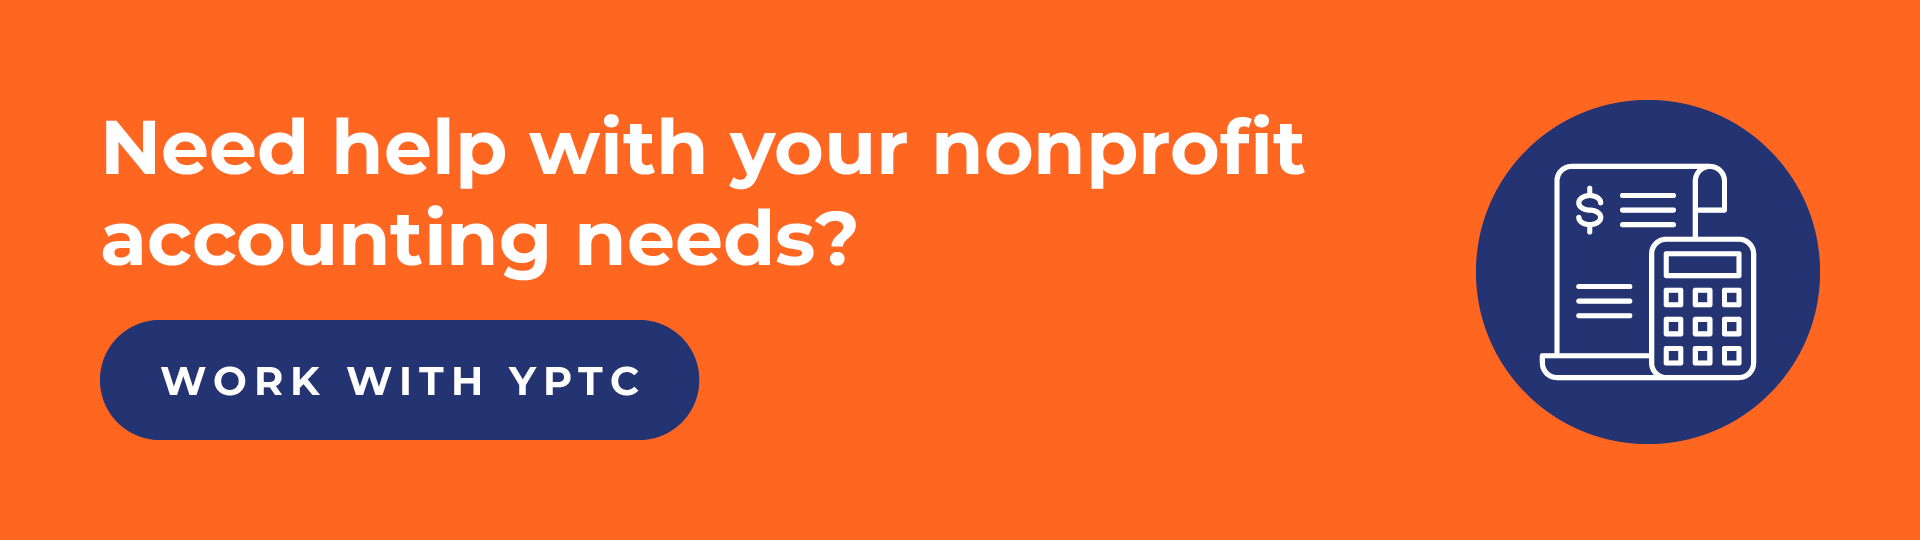 Click through to start working with YPTC for all your nonprofit accounting needs.